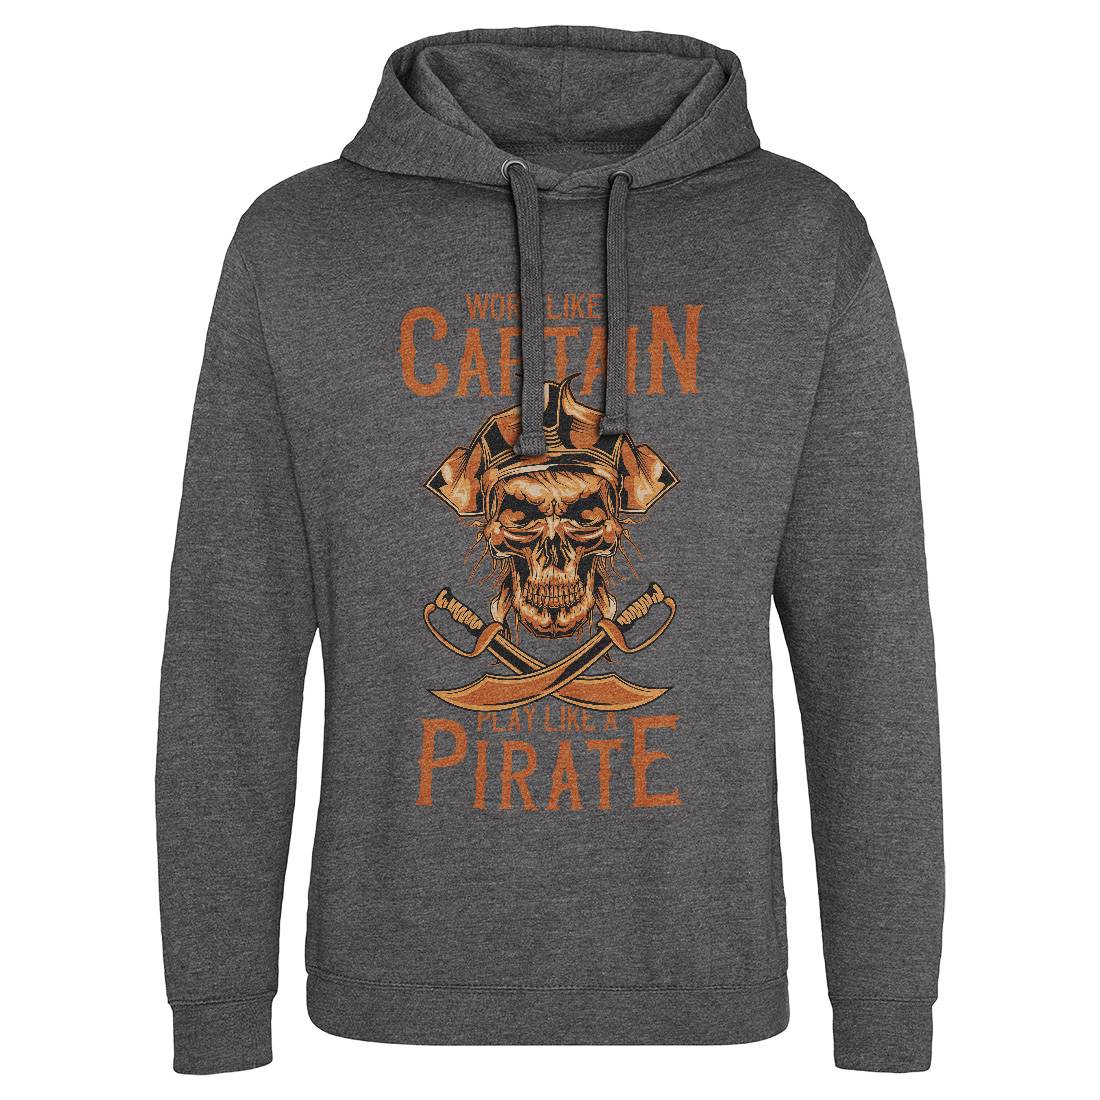 Pirate Mens Hoodie Without Pocket Navy B162